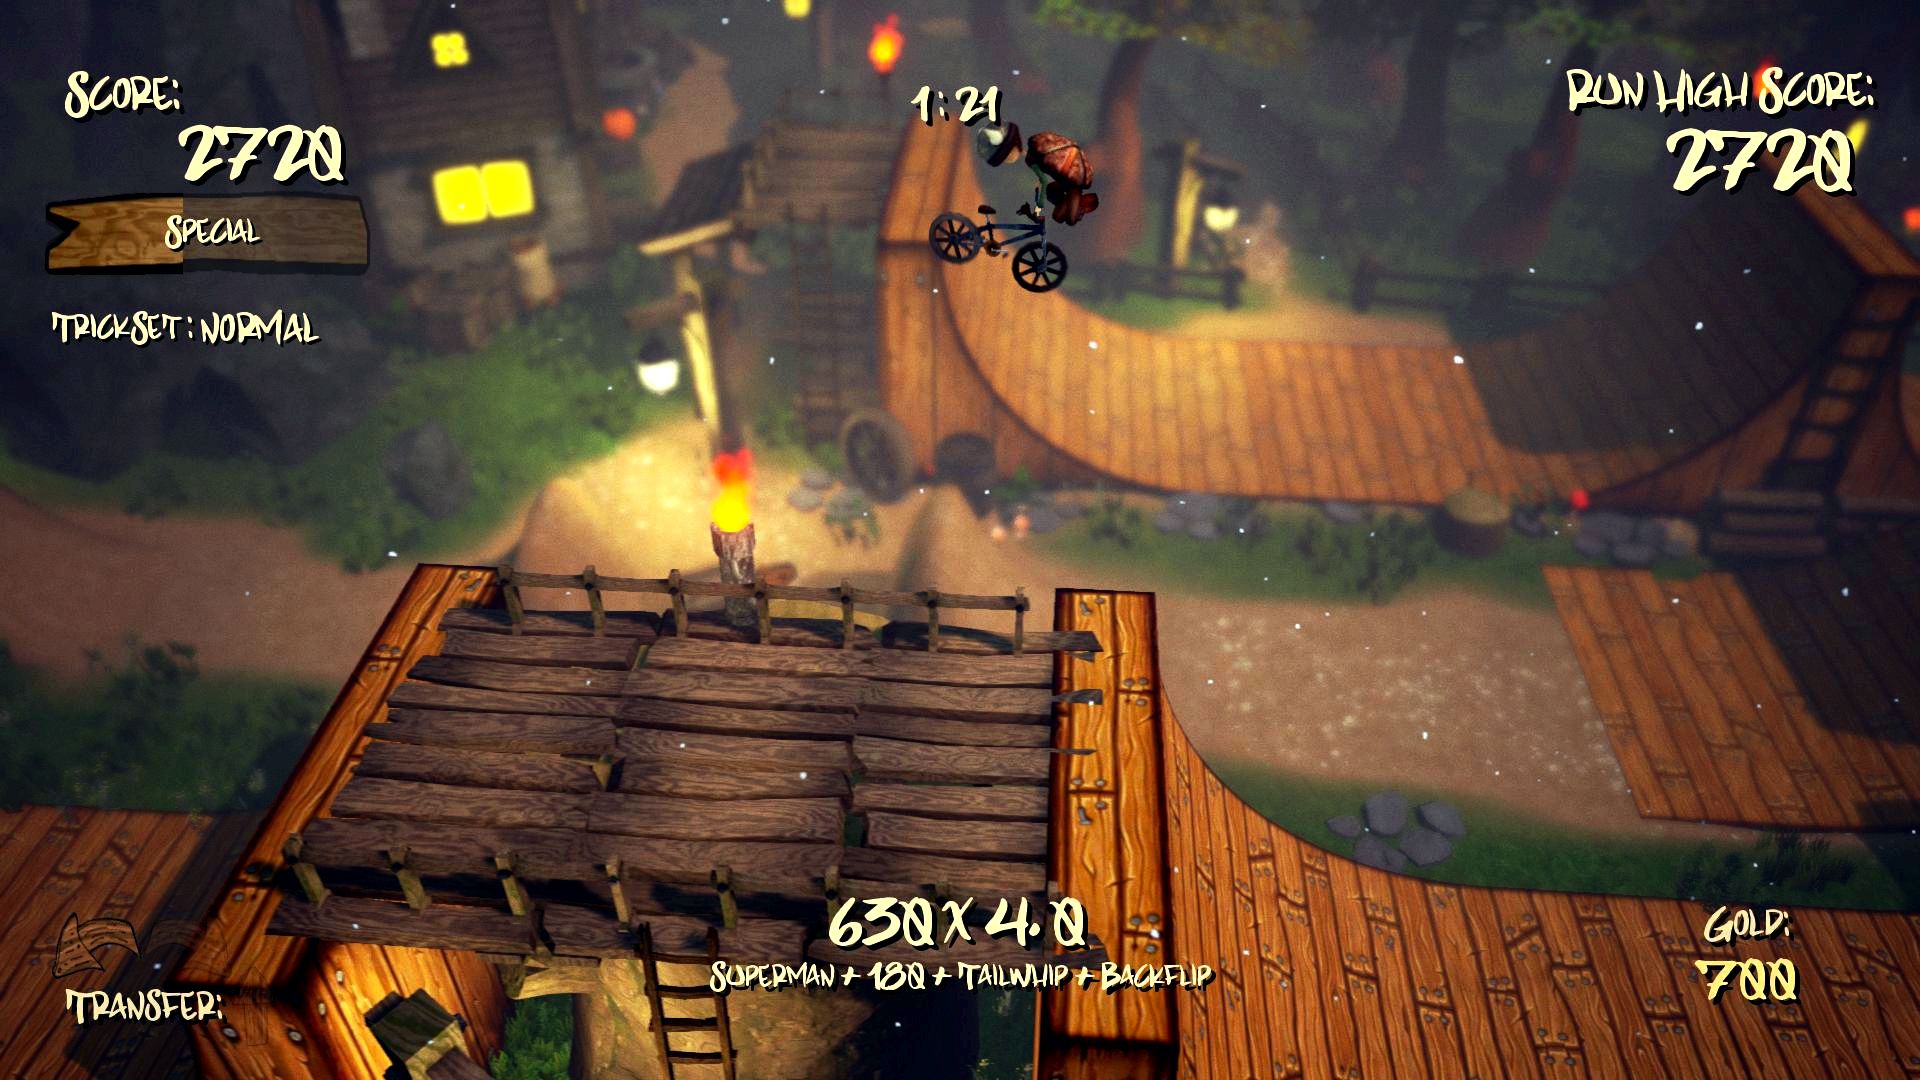 Riders of asgard home windows, mac, linux game - indie db following couple of days